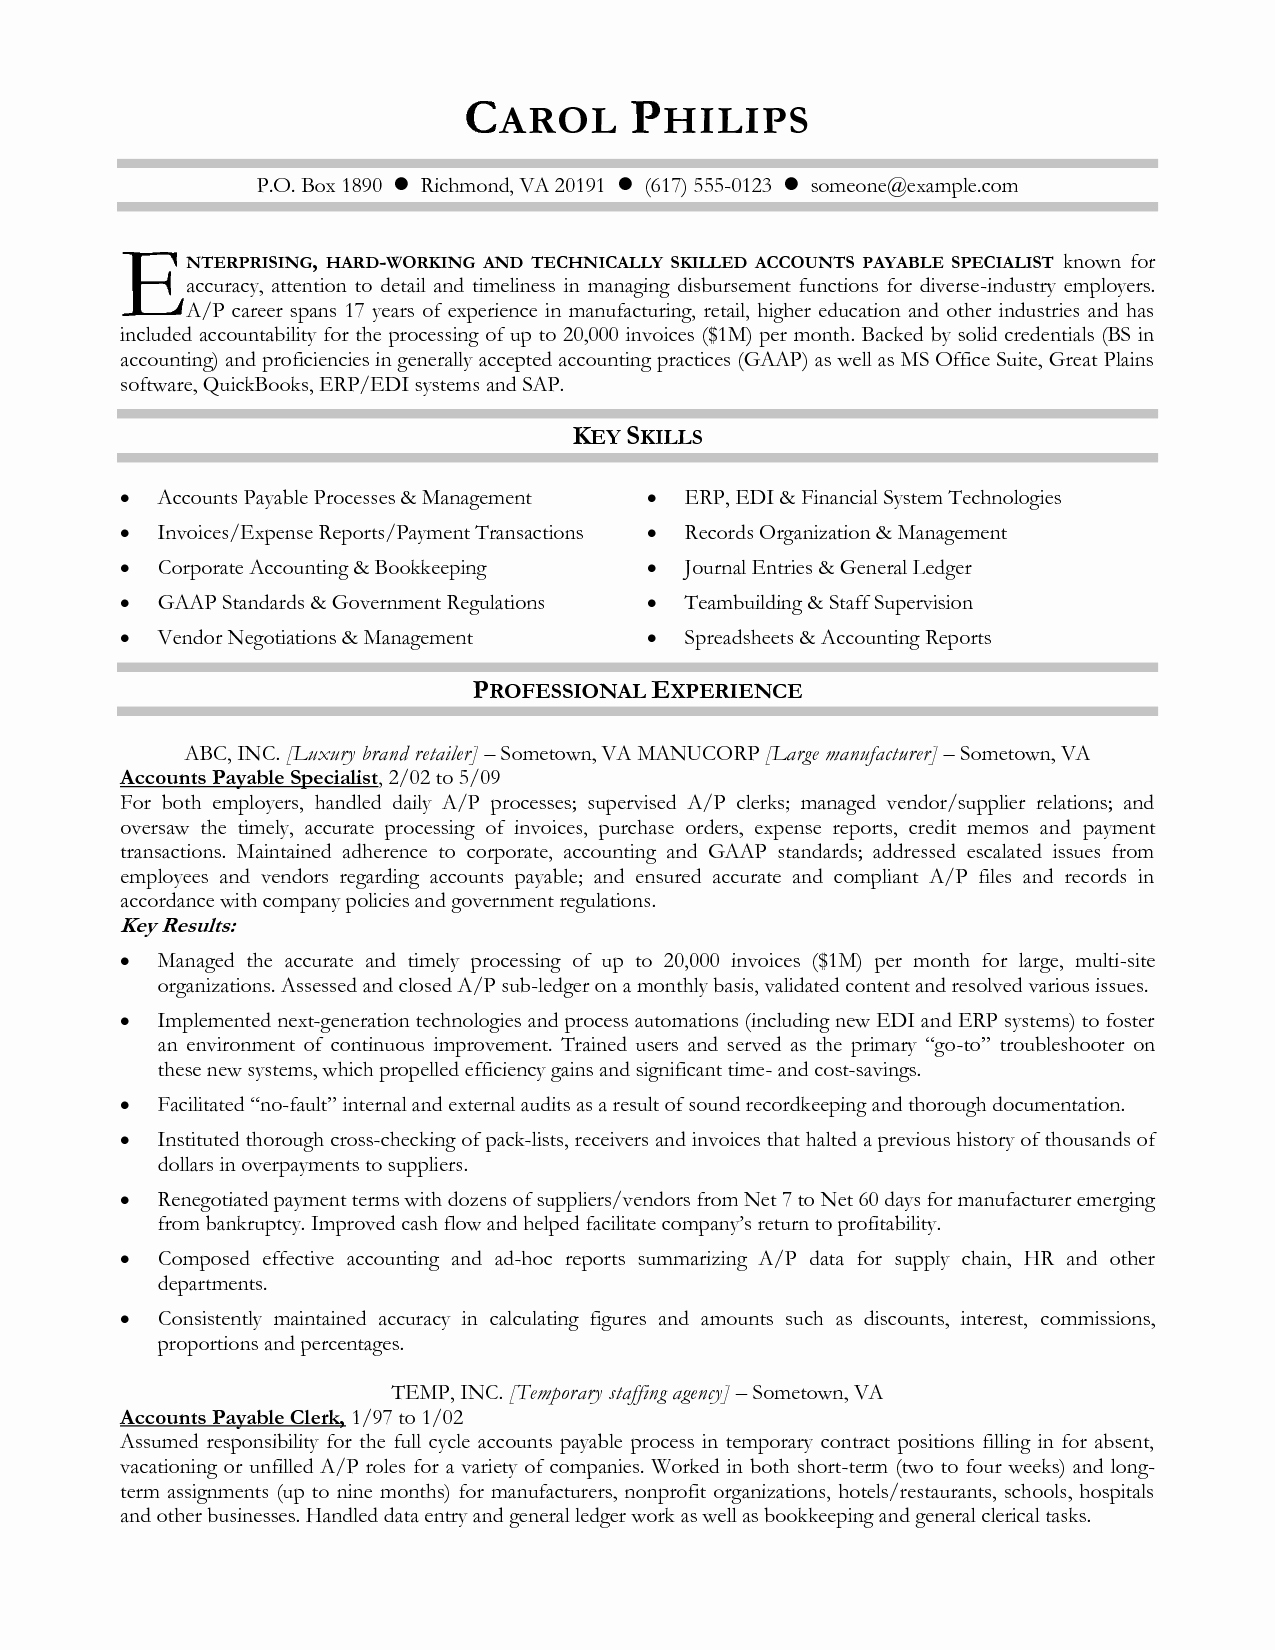 Lecker Accounts Receivable Specialist Resume Payroll